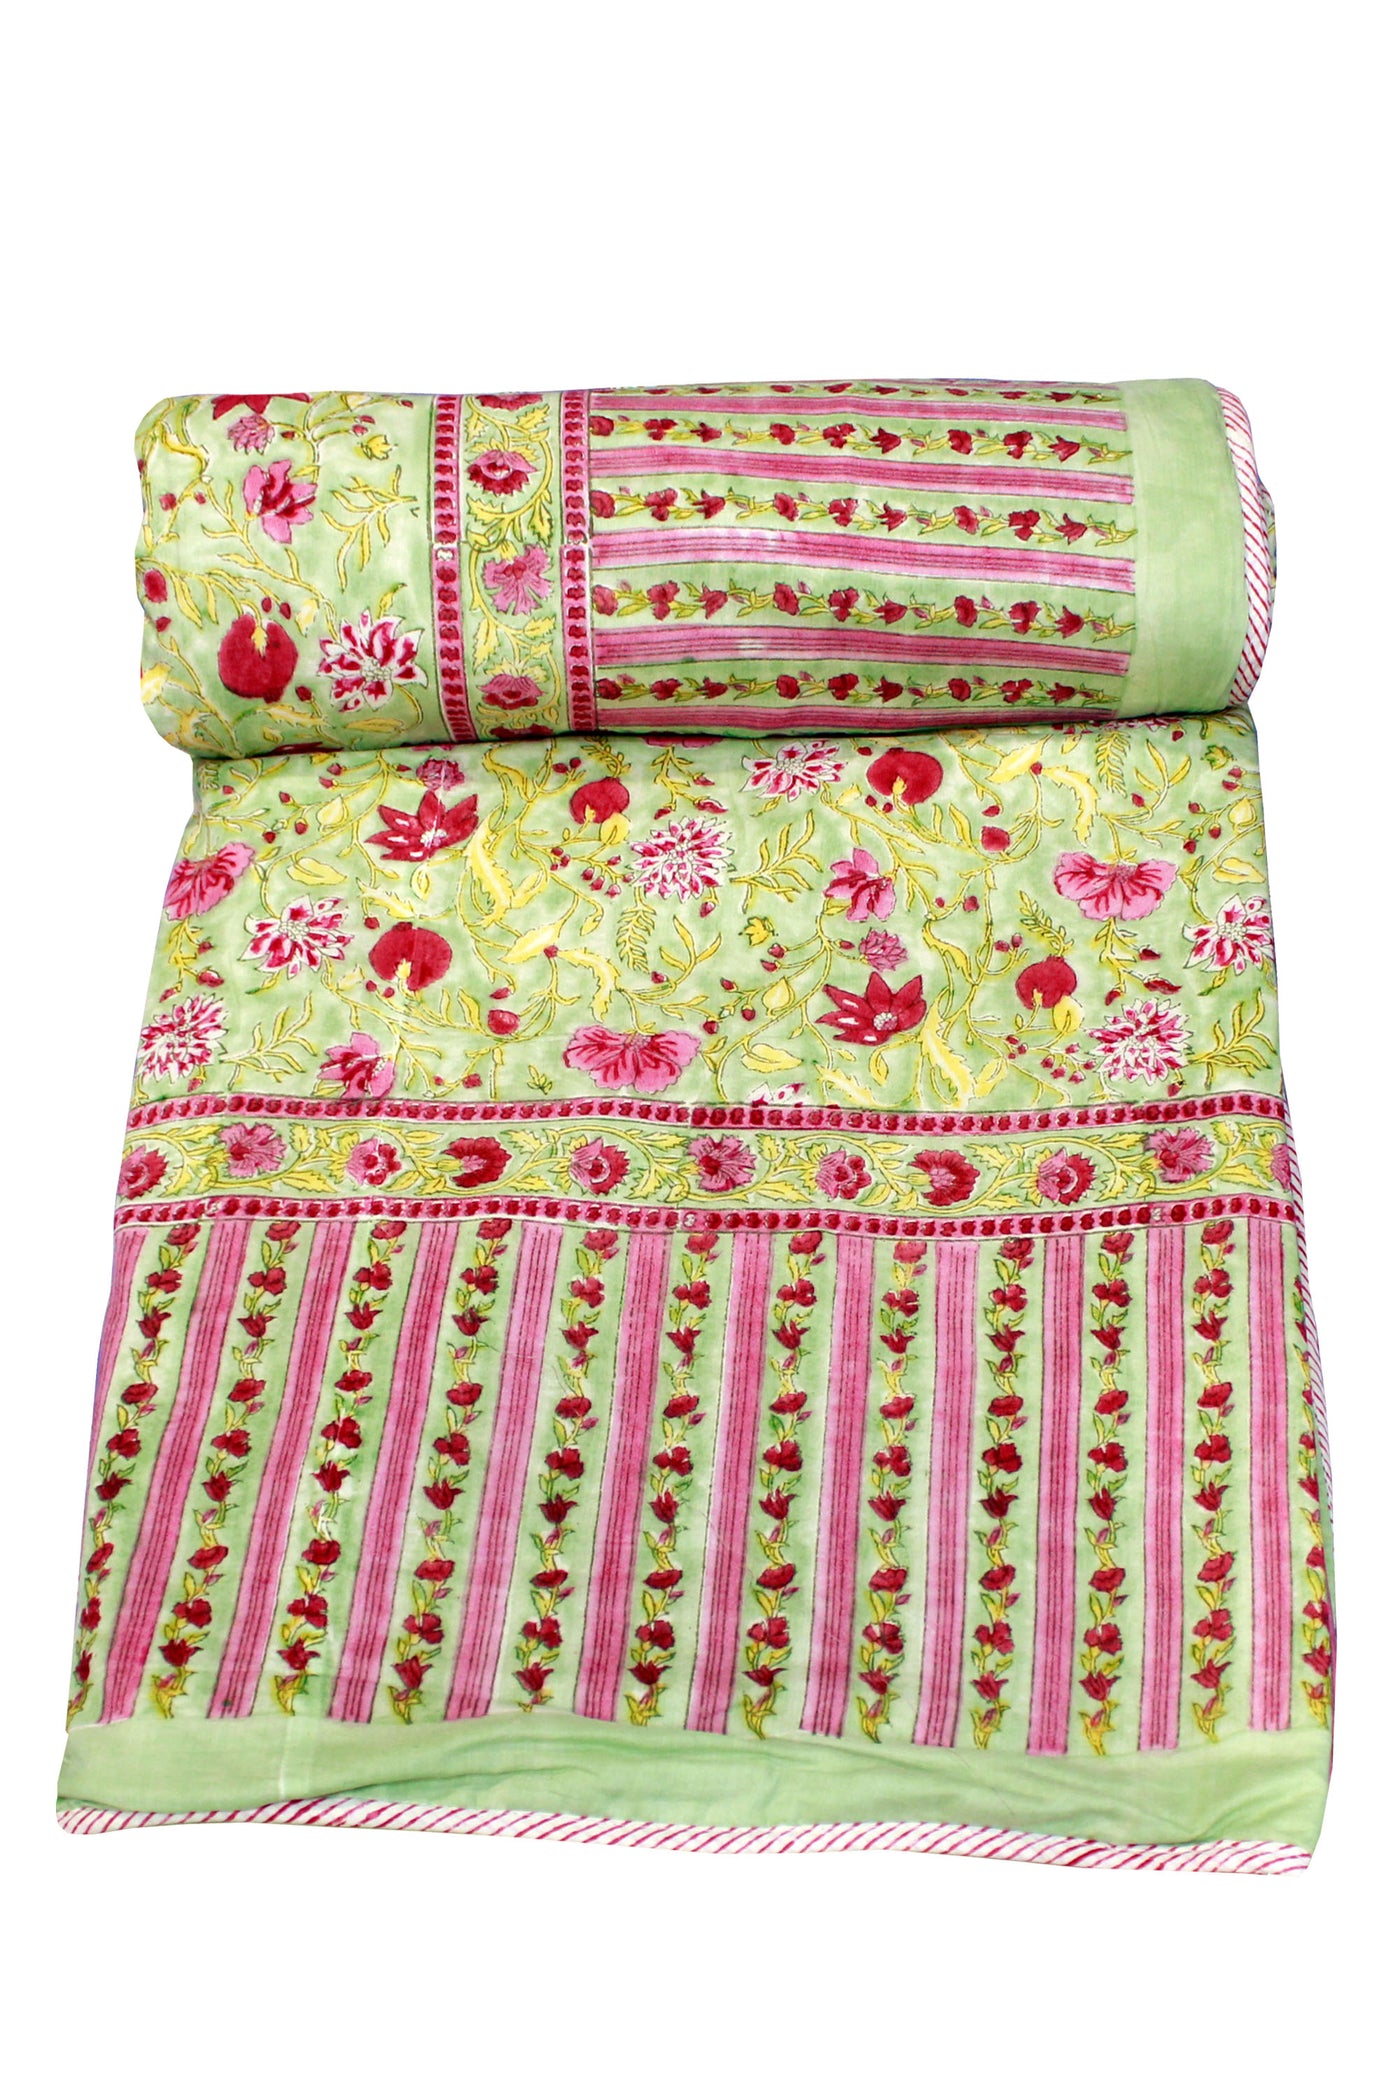 Cotton Floral Jaal Hand Block Print Dohar in Forest Green